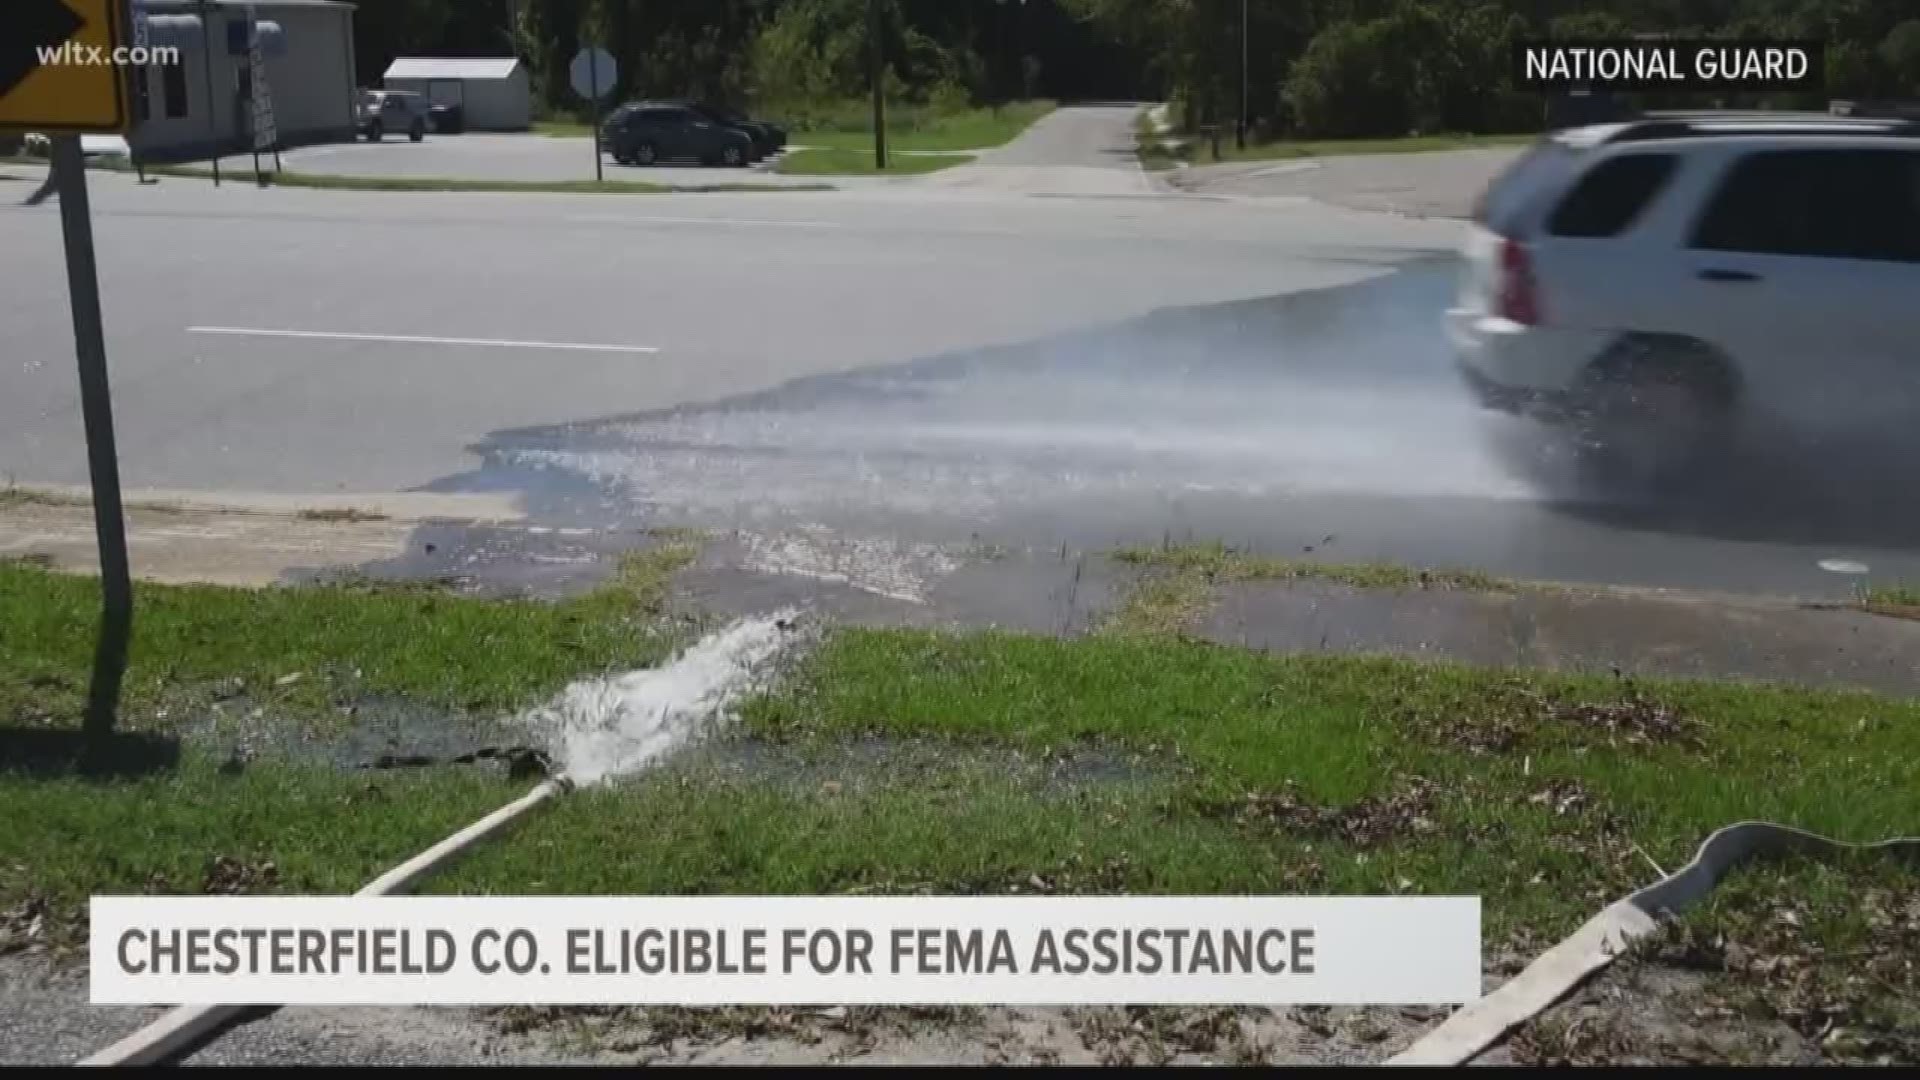 Chesterfield county residents are now eligible for FEMA assistance